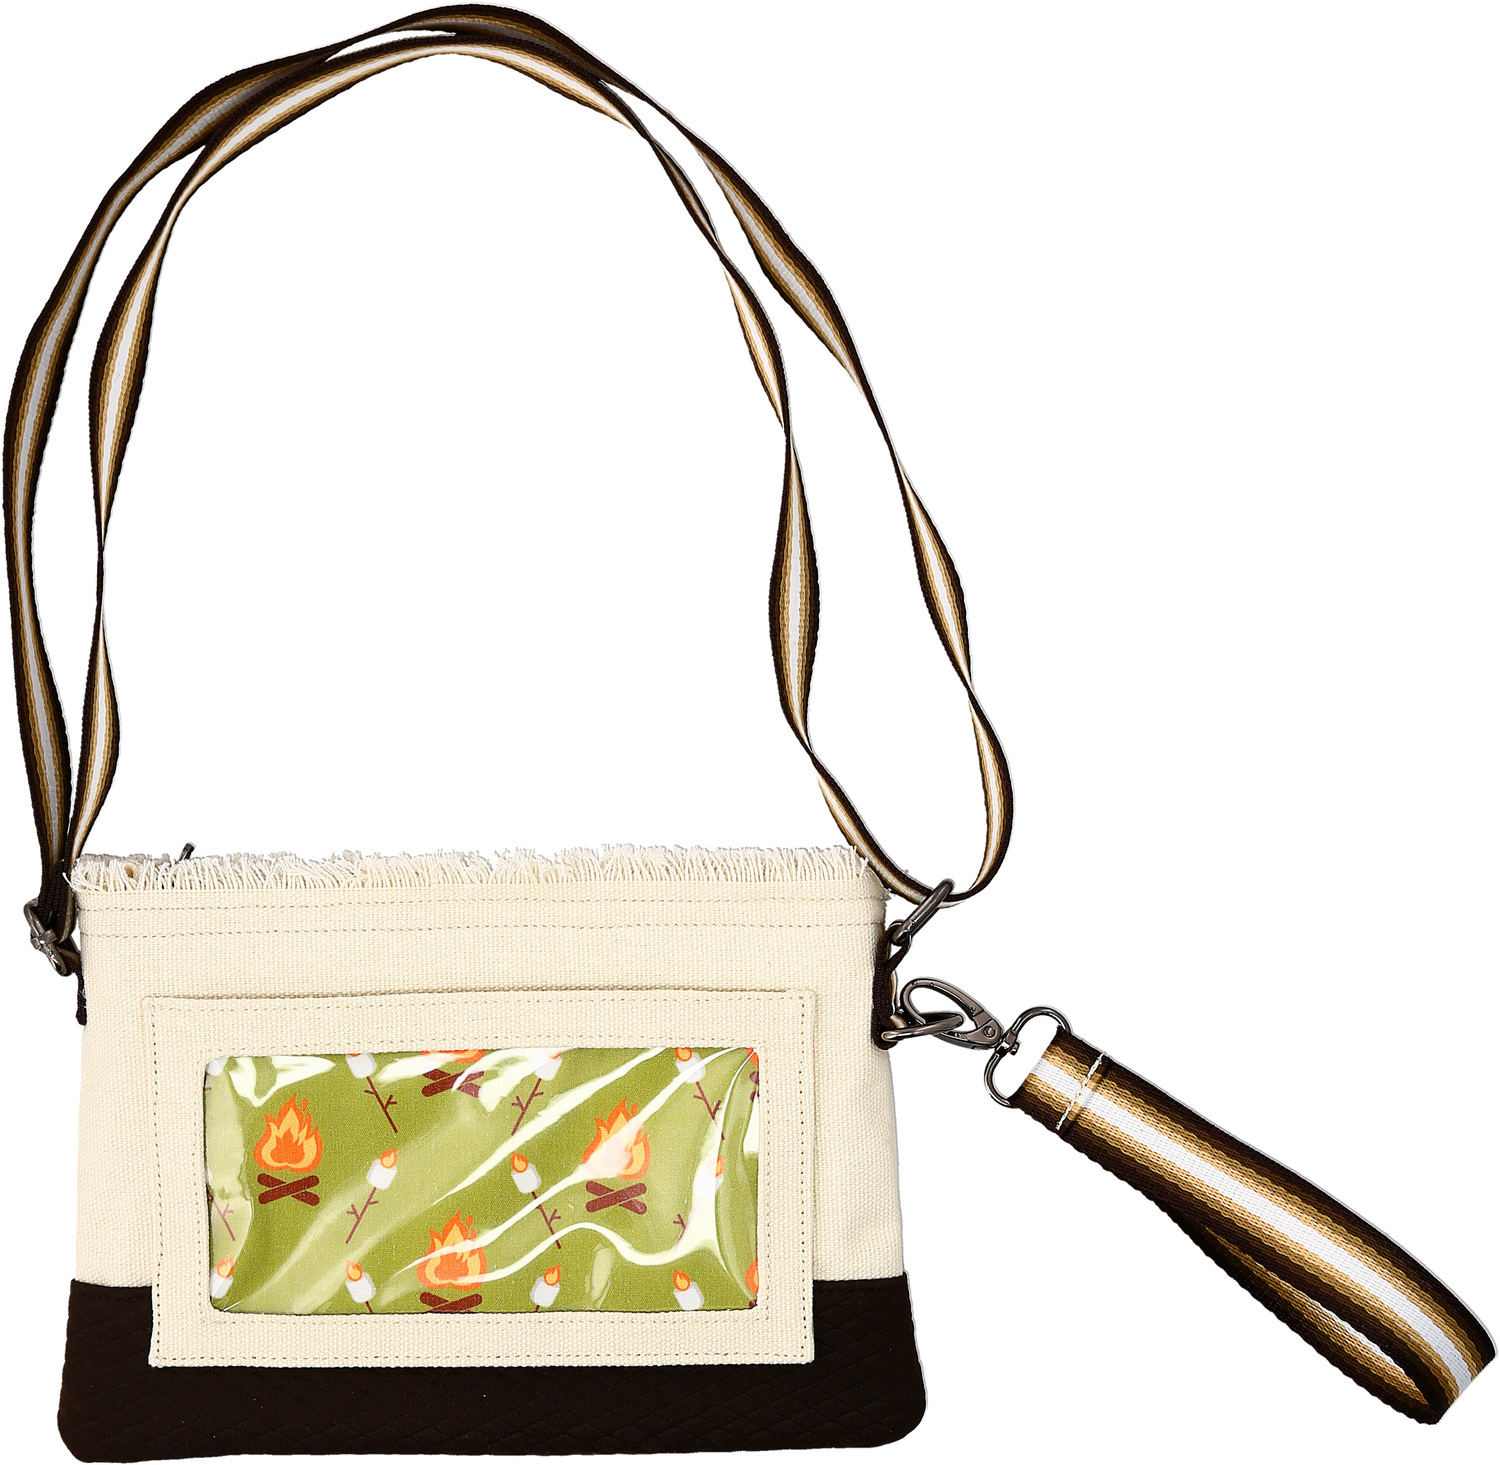 Camp by We People - Camp - 9.5" x 6.5" Touch Screen Crossbody Bag